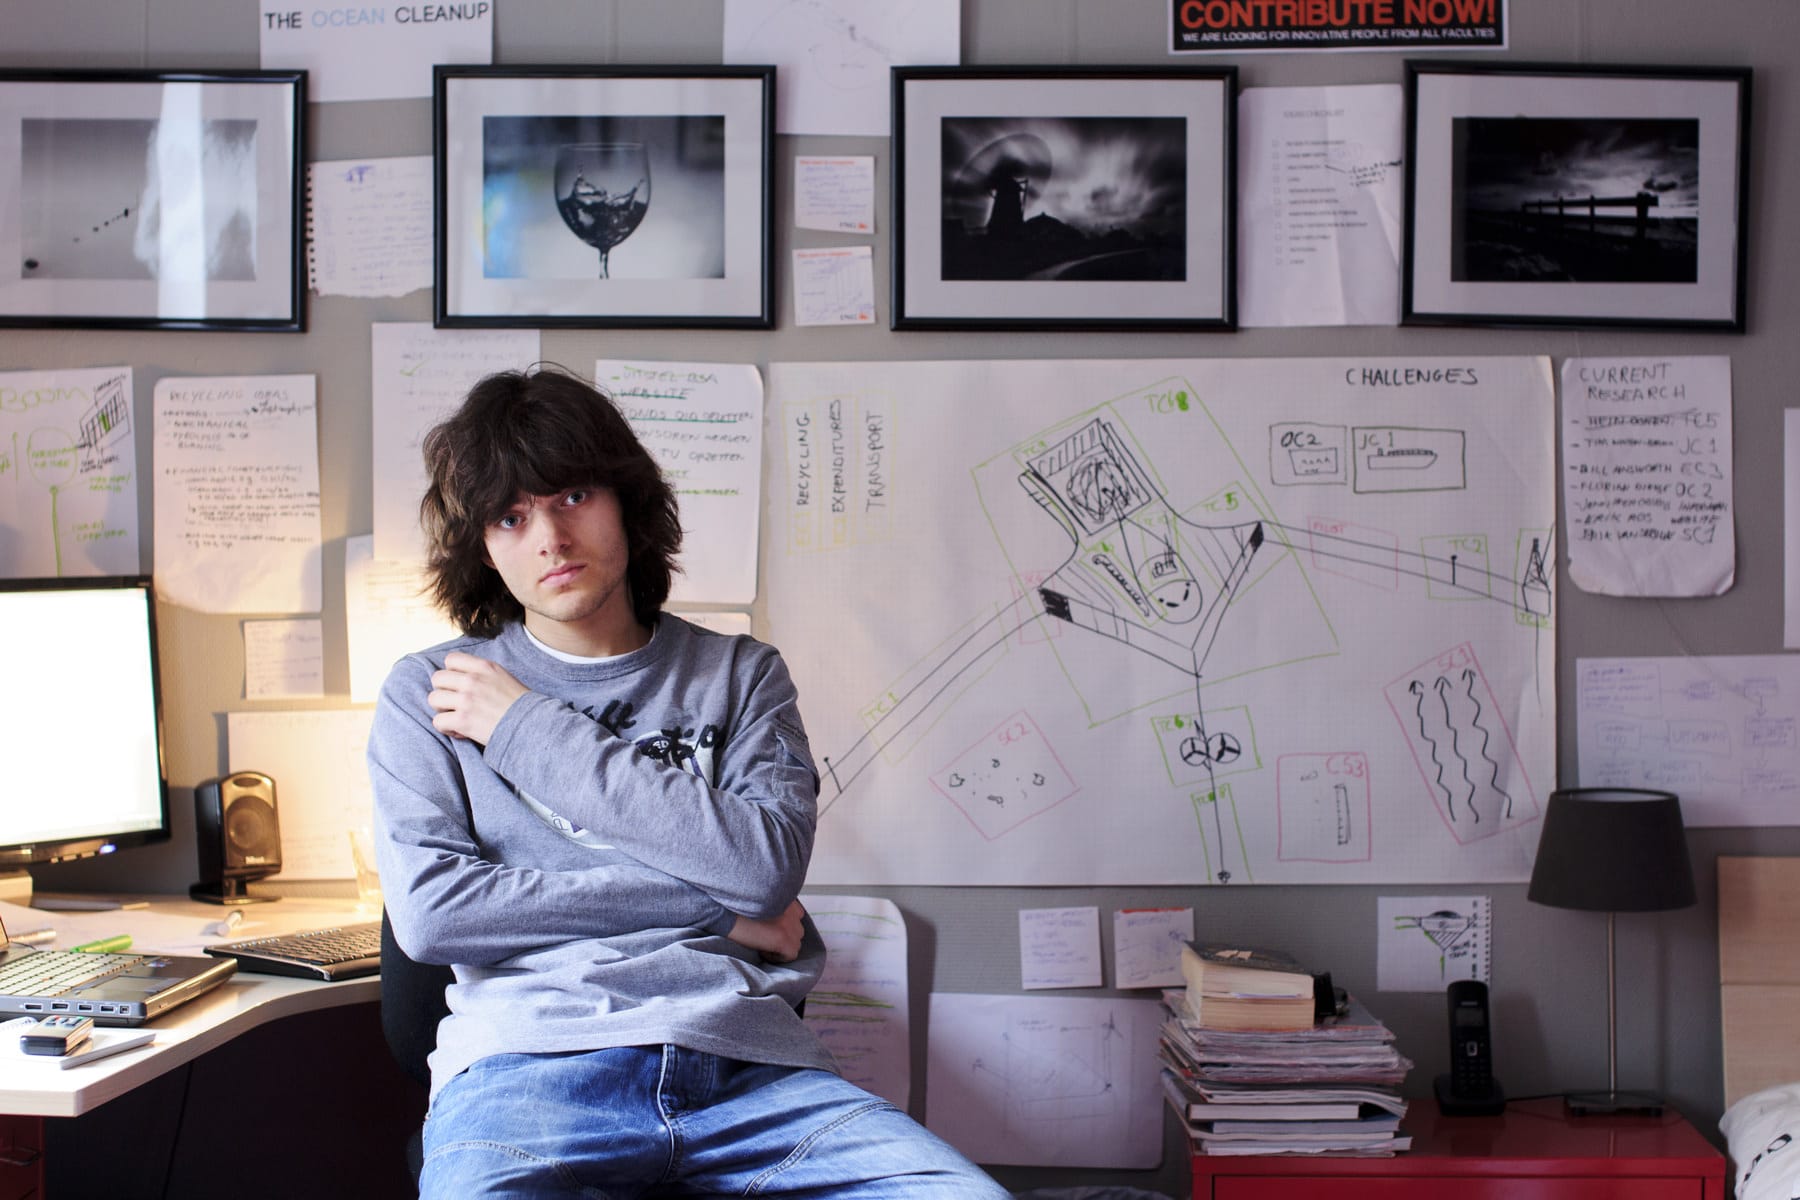 Featured image for “This Kid Says He Can Rid the Ocean of Plastic Pollution! ASA Interview With the Amazing Boyan Slat (part 1)"